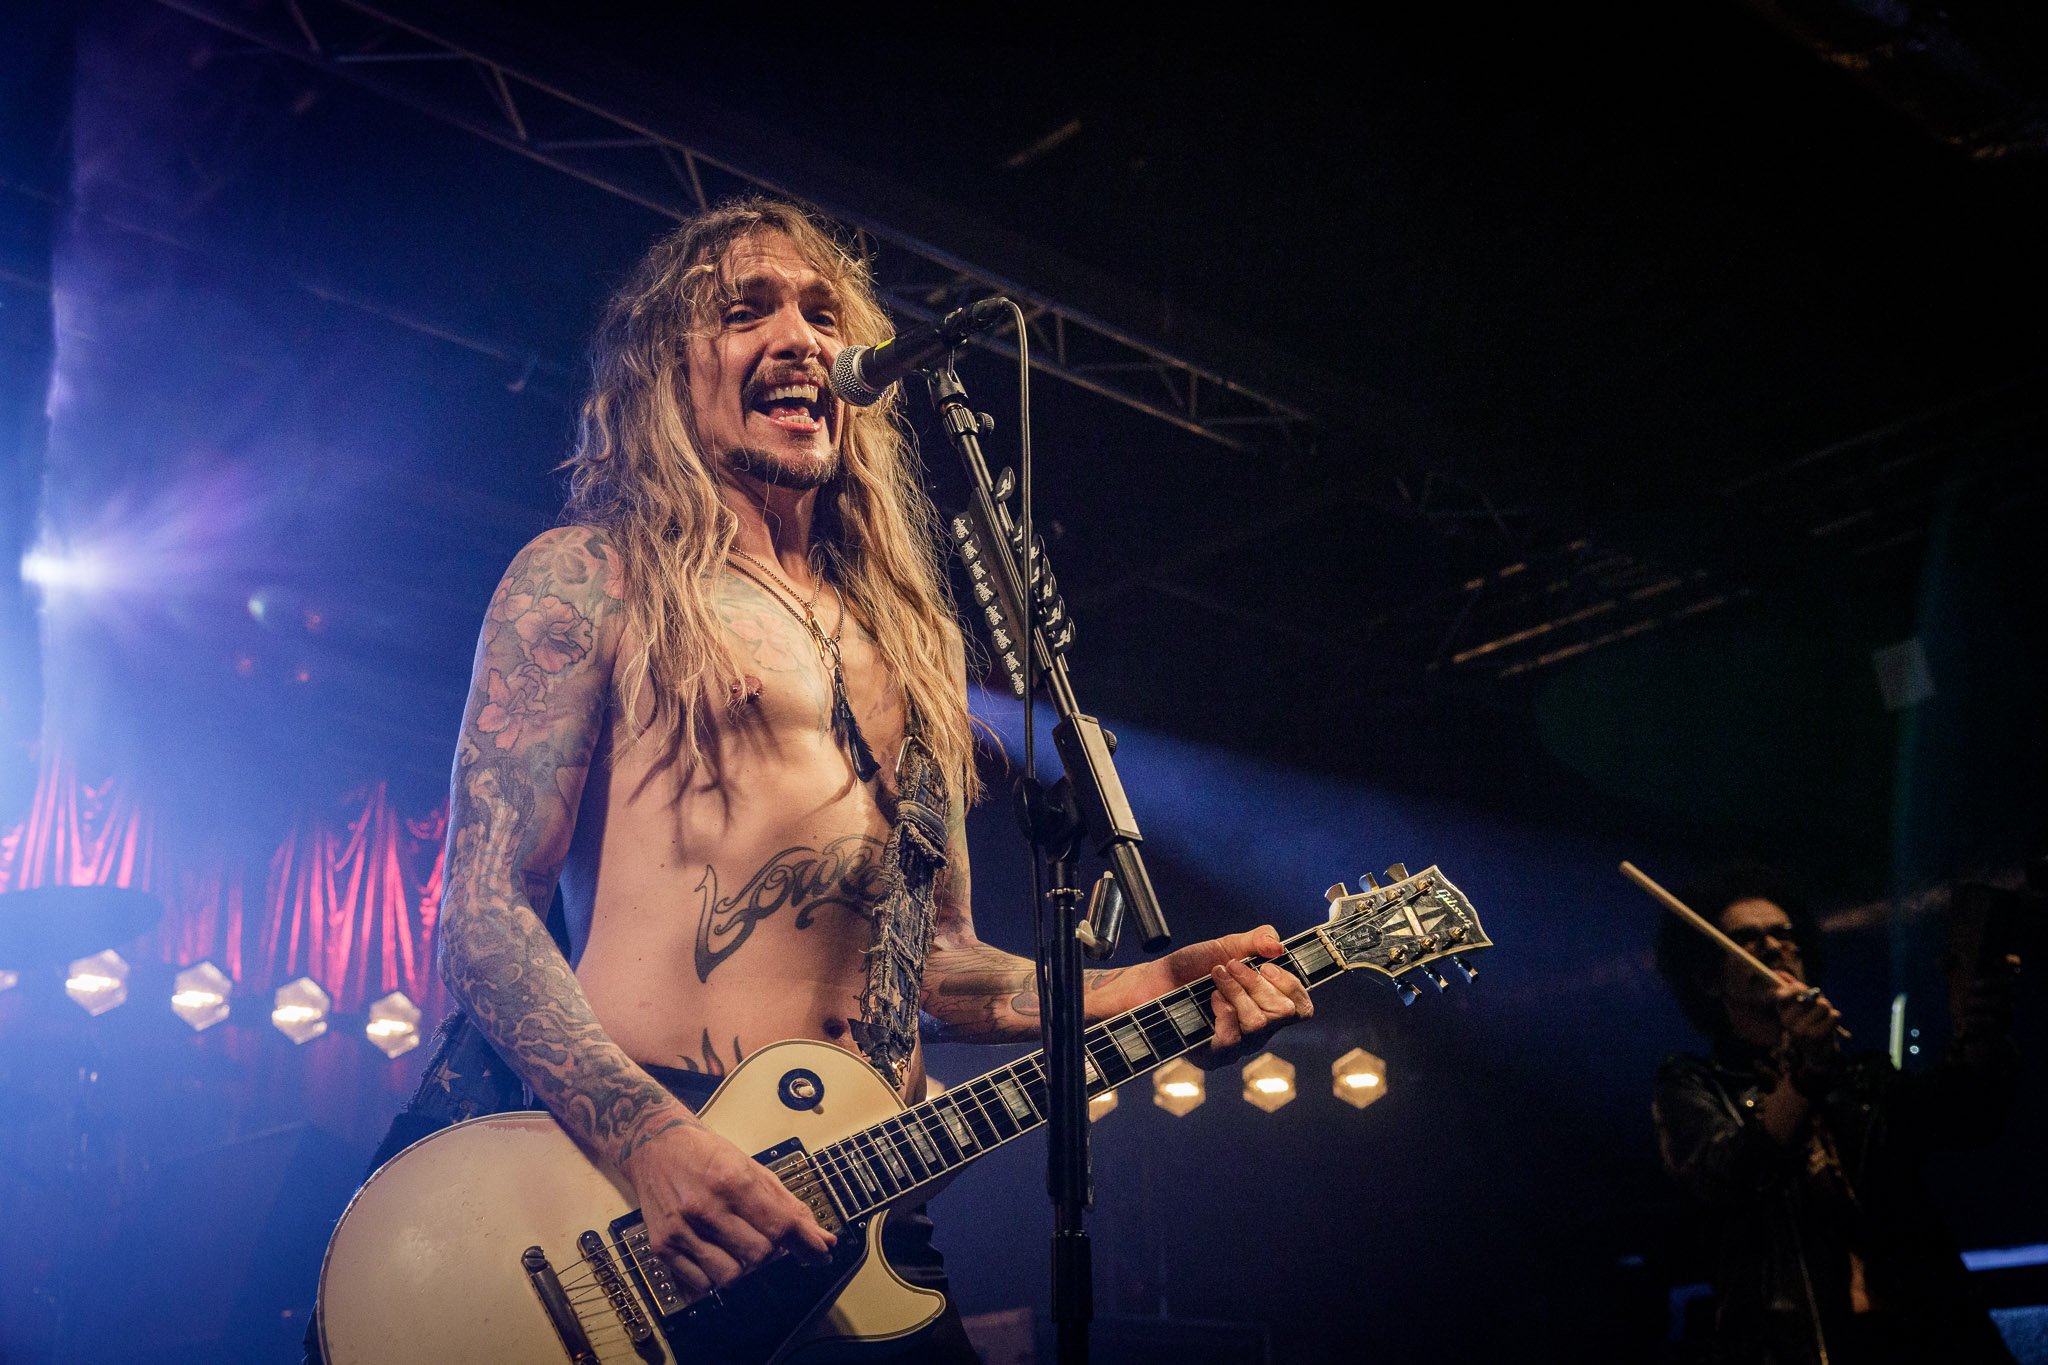 The Darkness at the O2 Academy in Liverpool on December 2nd 2021